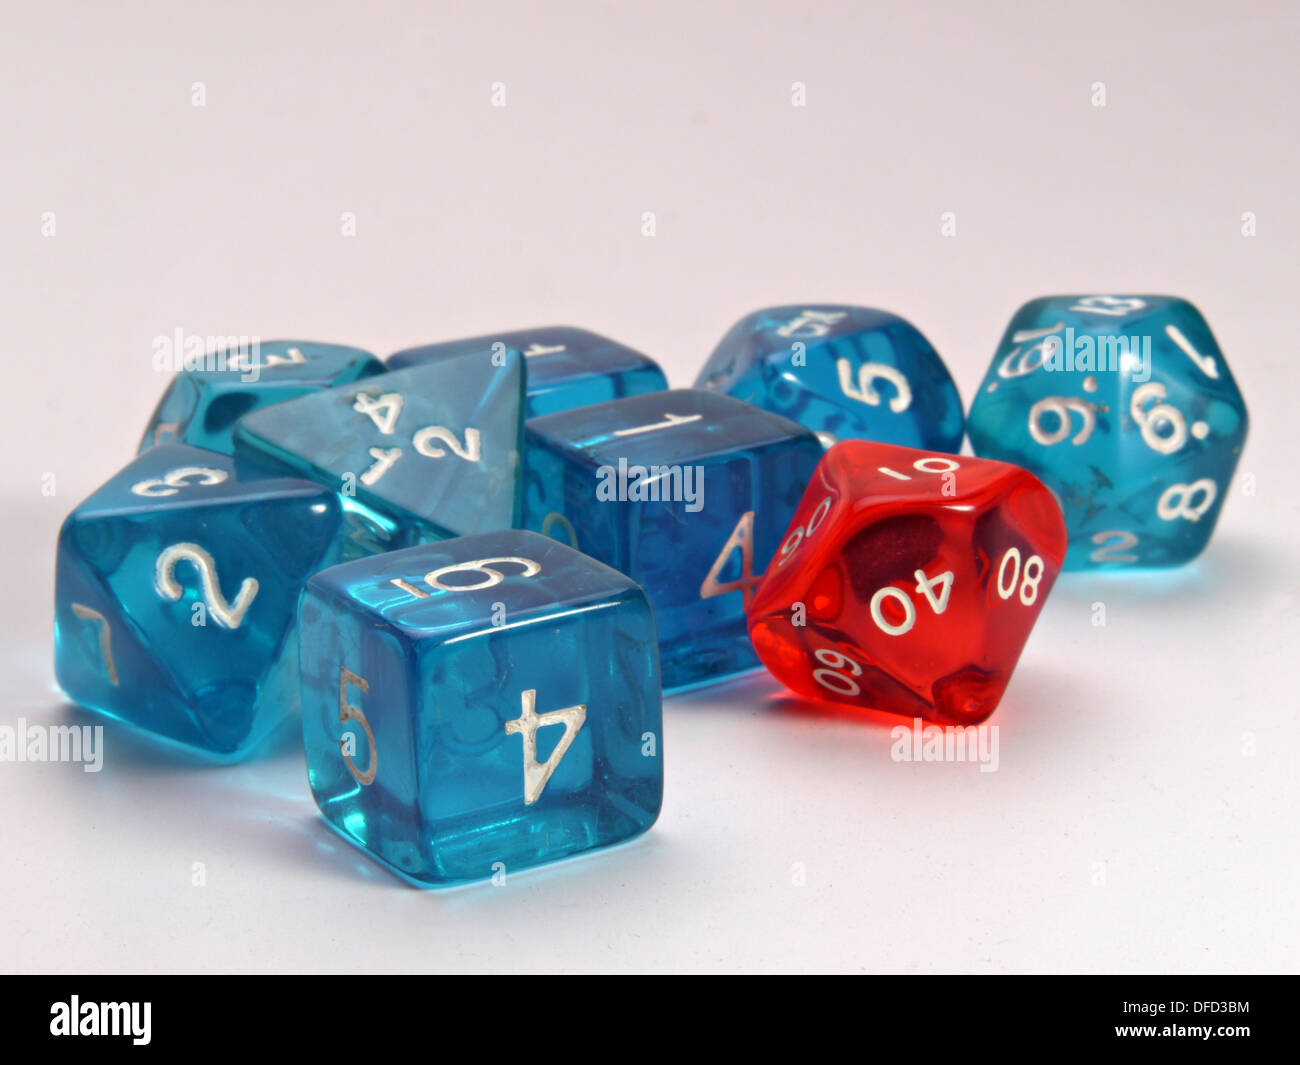 A old used set of dice used in role playing games. Stock Photo